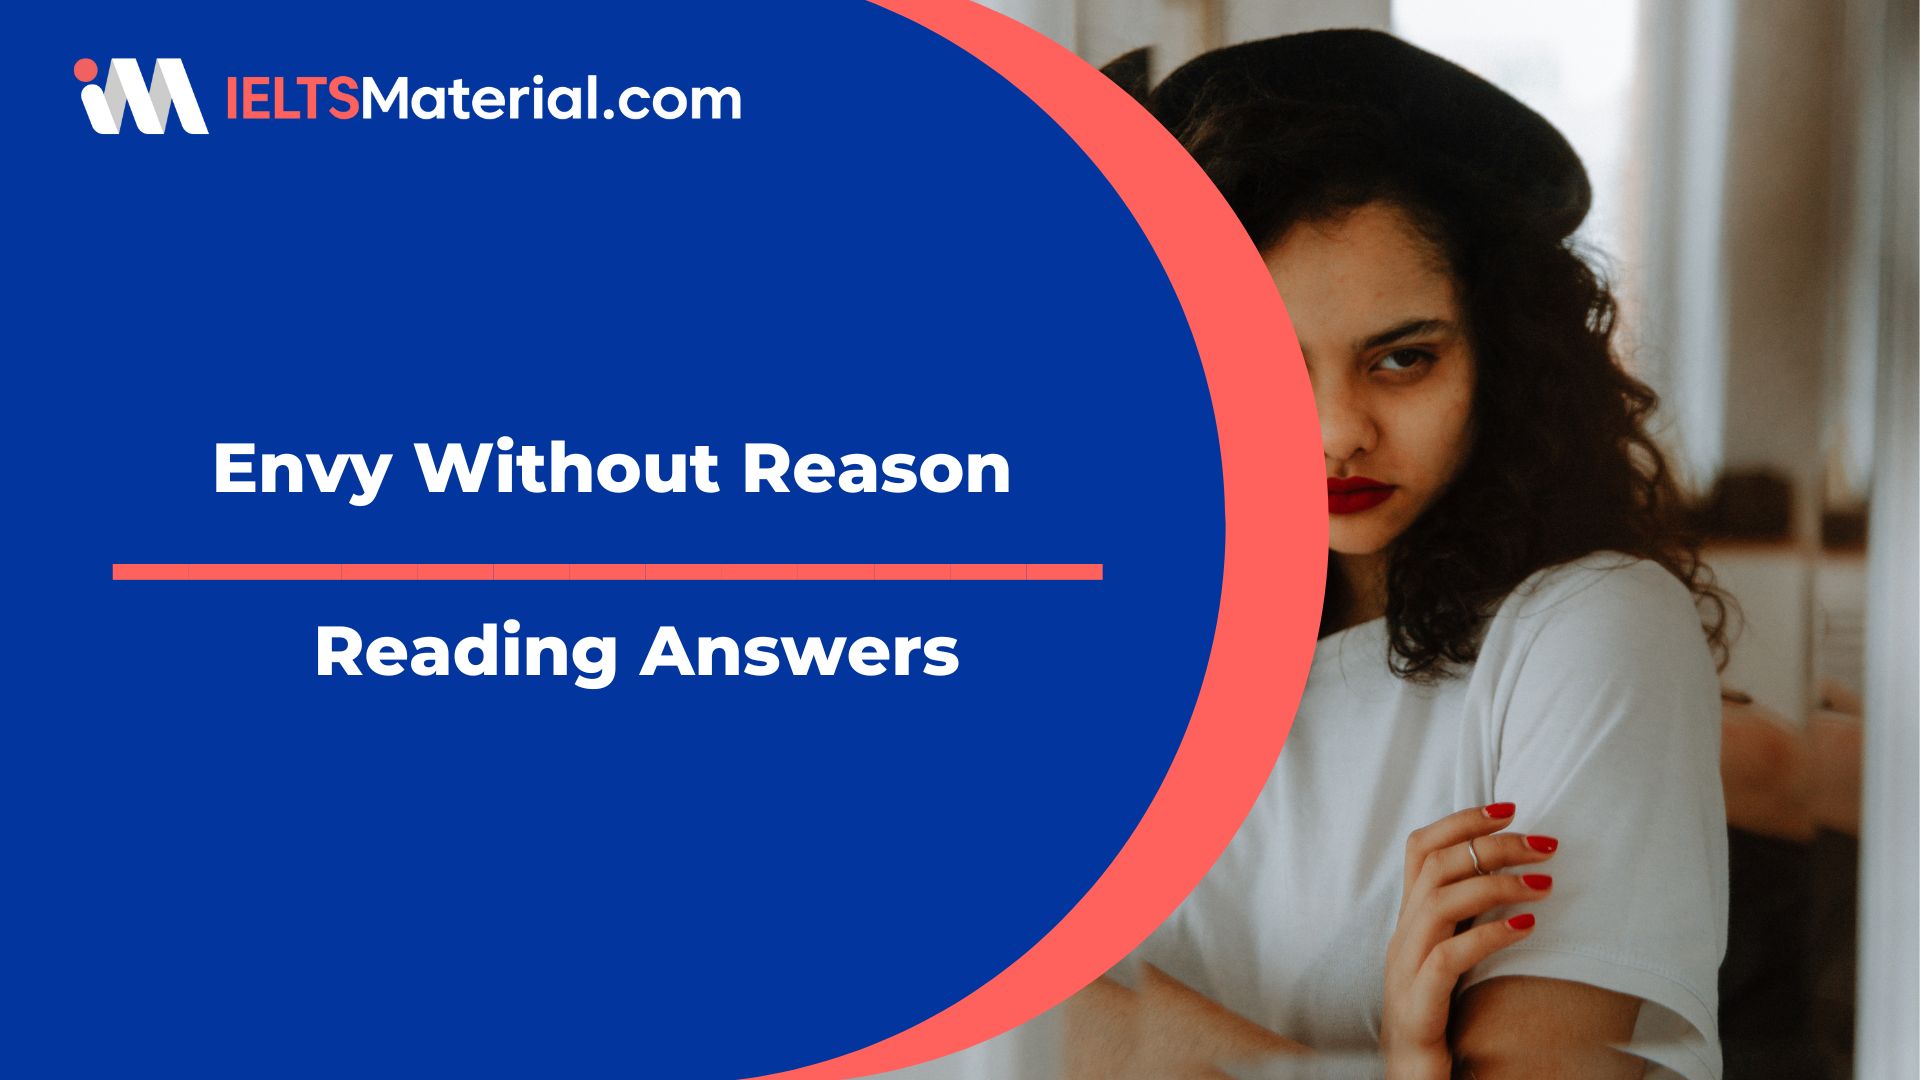 Envy Without Reason Reading Answers